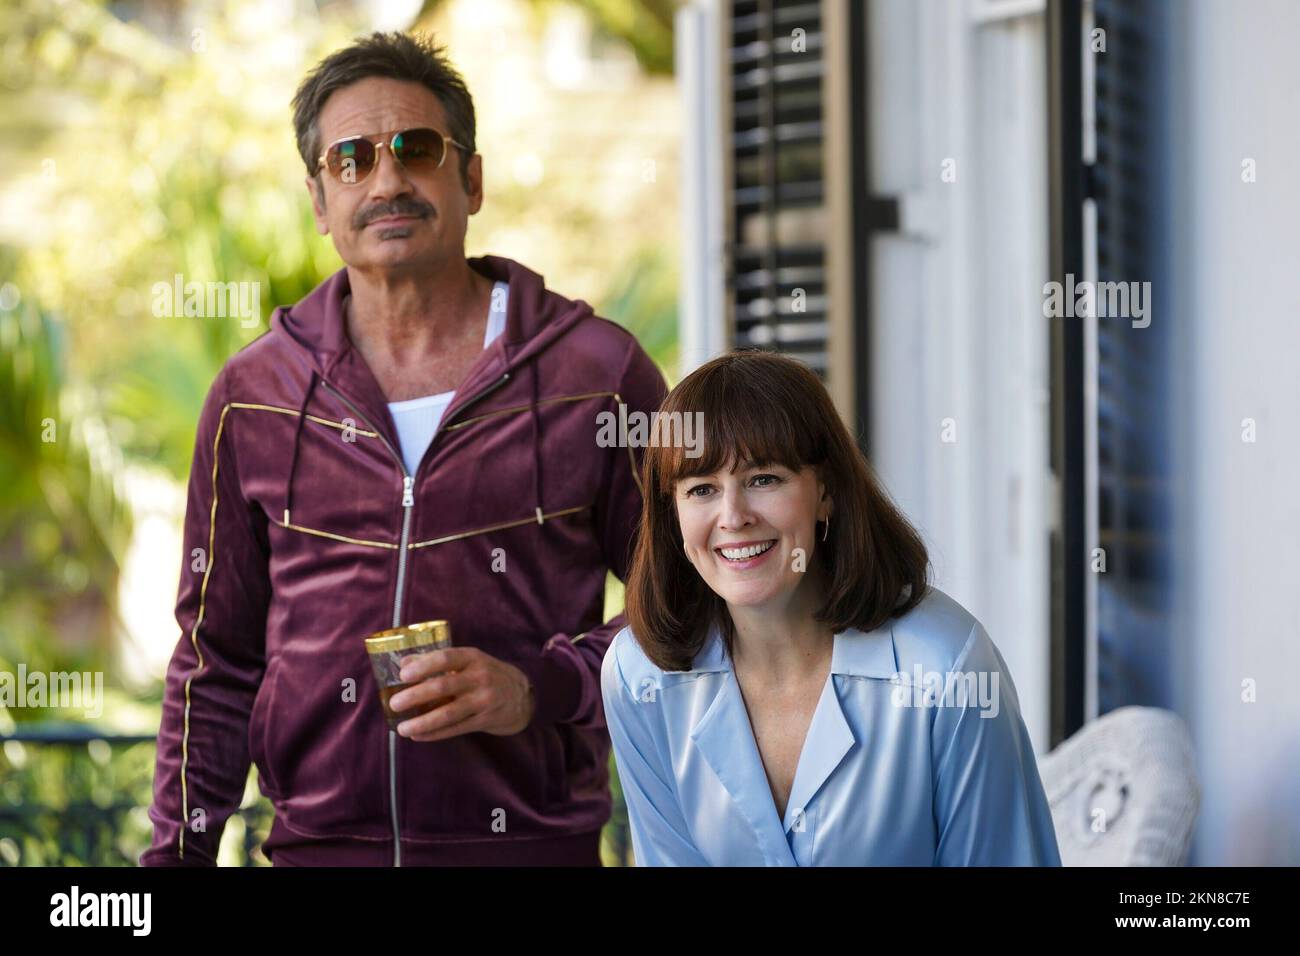 DAVID DUCHOVNY and ROSEMARIE DEWITT in THE ESTATE (2022), directed by DEAN CRAIG. Credit: SIGNATURE FILMS / Album Stock Photo